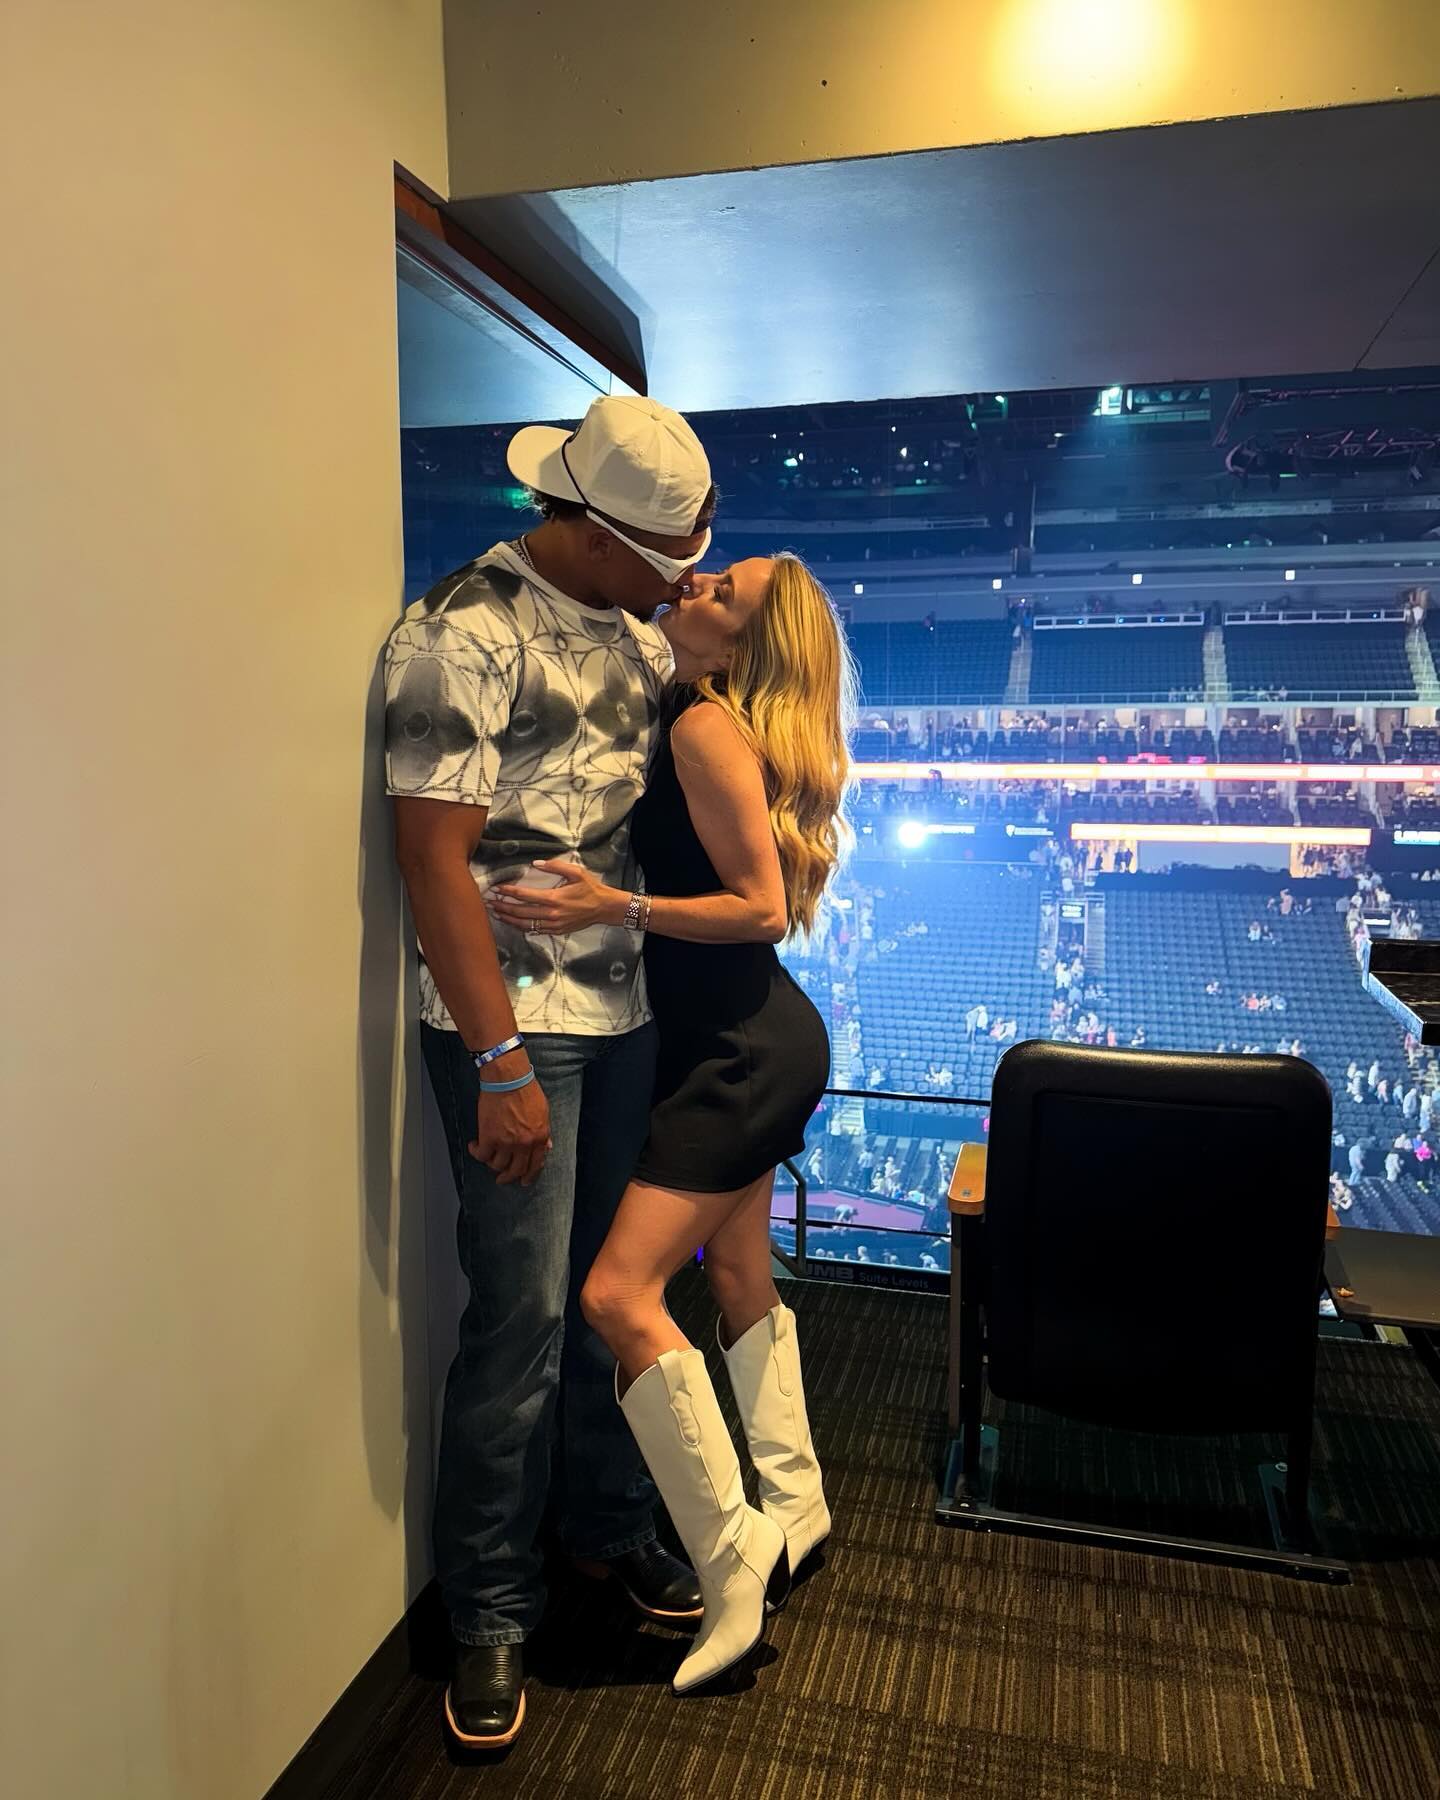 The NFL couple finished their weekend by going to a Tim McGraw concert